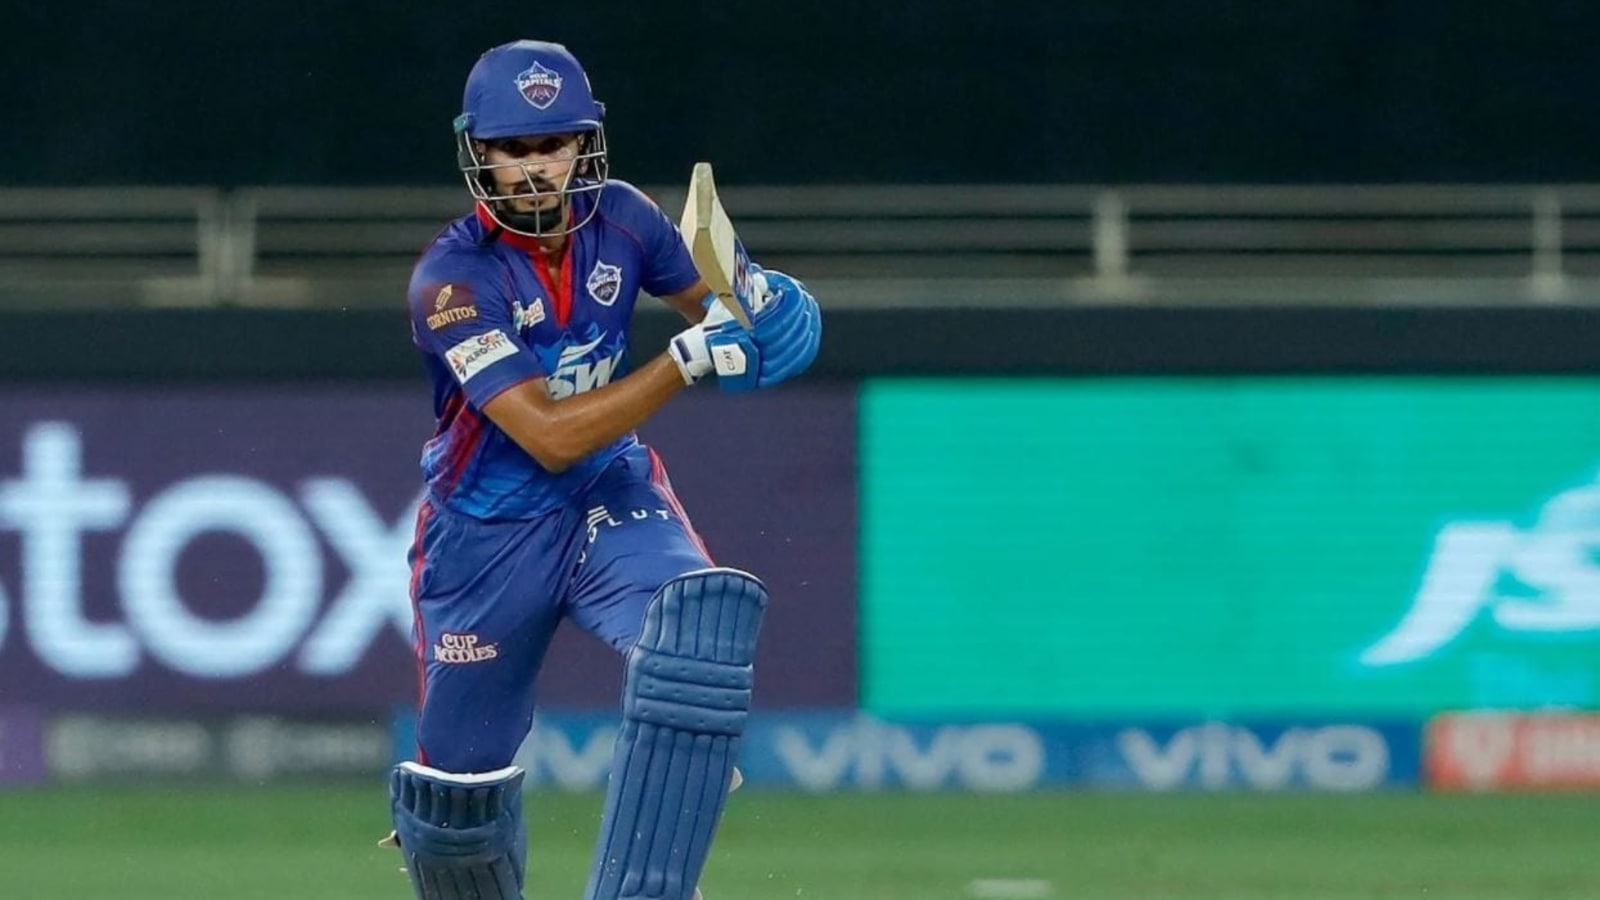 Which IPL franchise will Shreyas Iyer's join for 2022 season? India